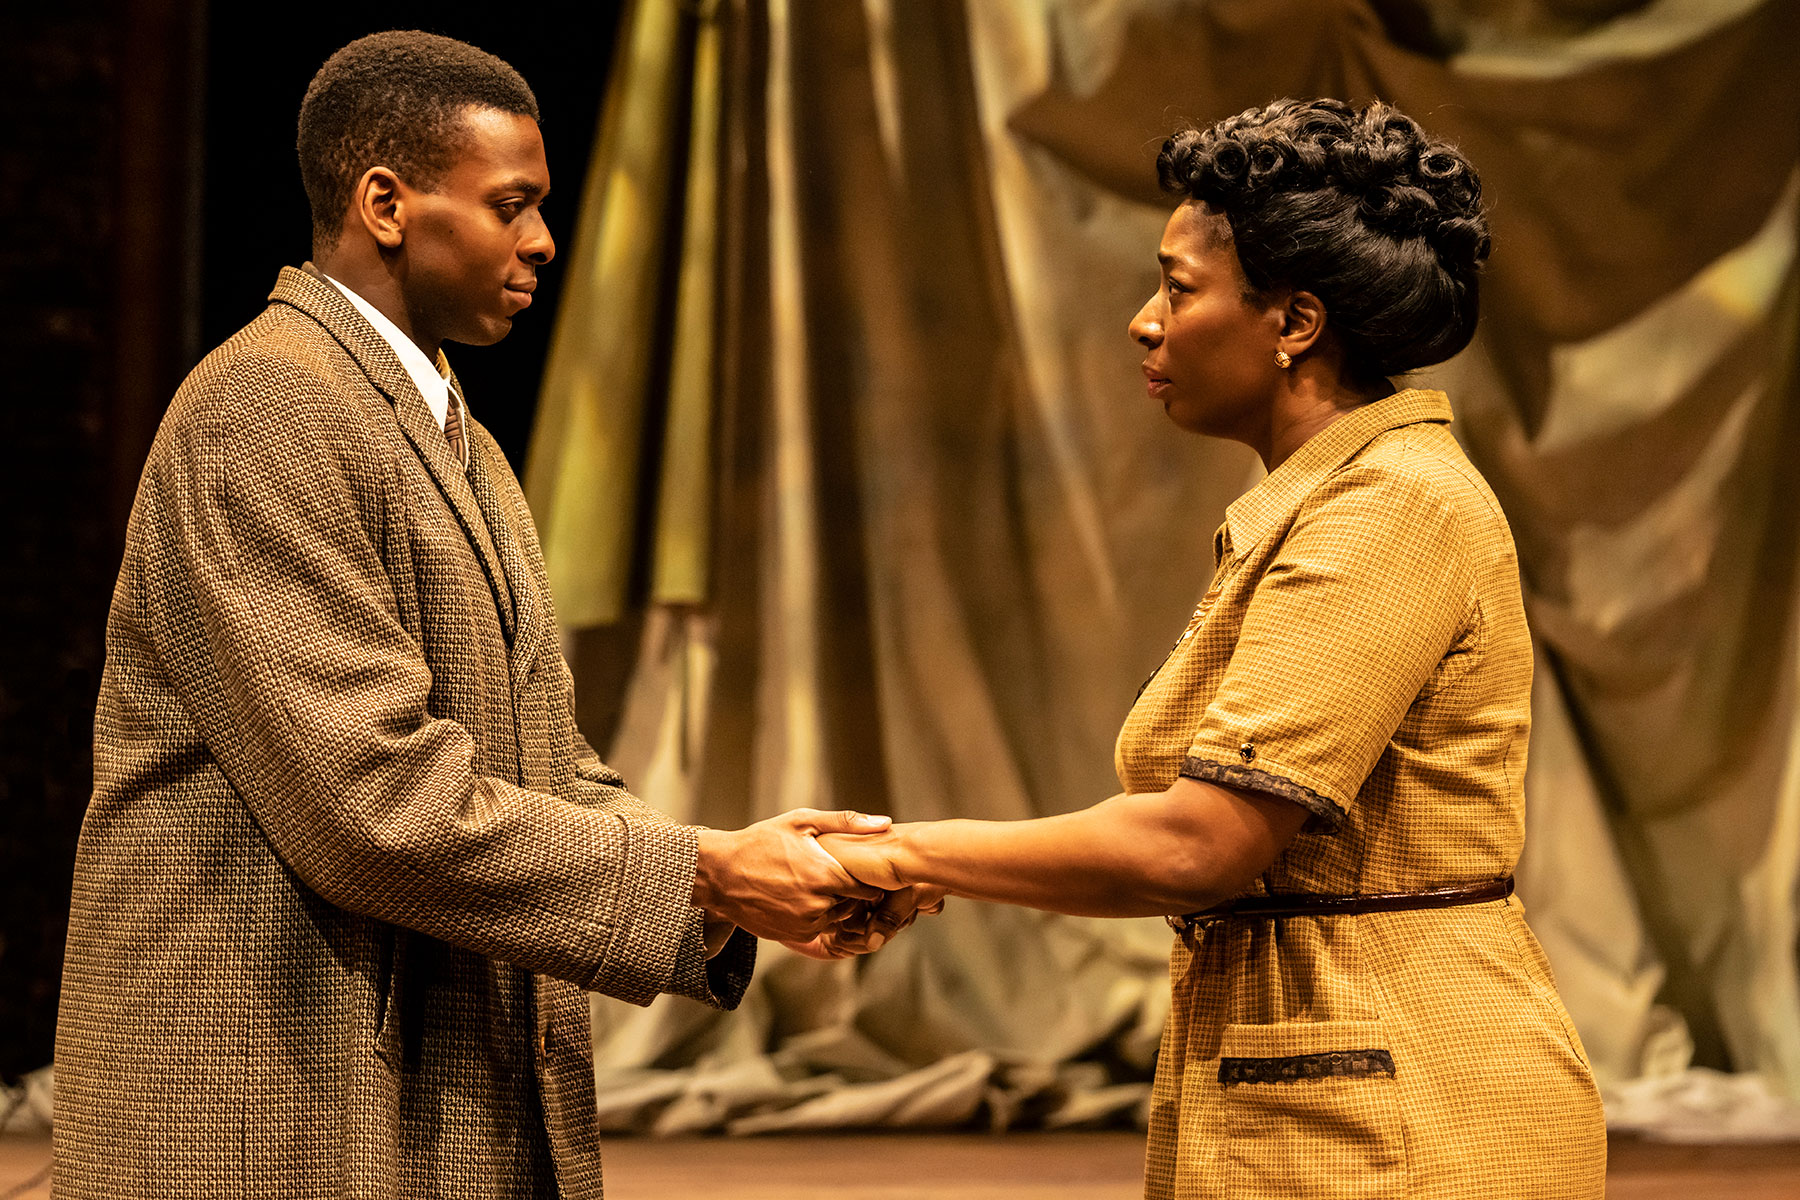 Daniel Adeosun and Tanya Moodie in Trouble in Mind (c) Johan Persson